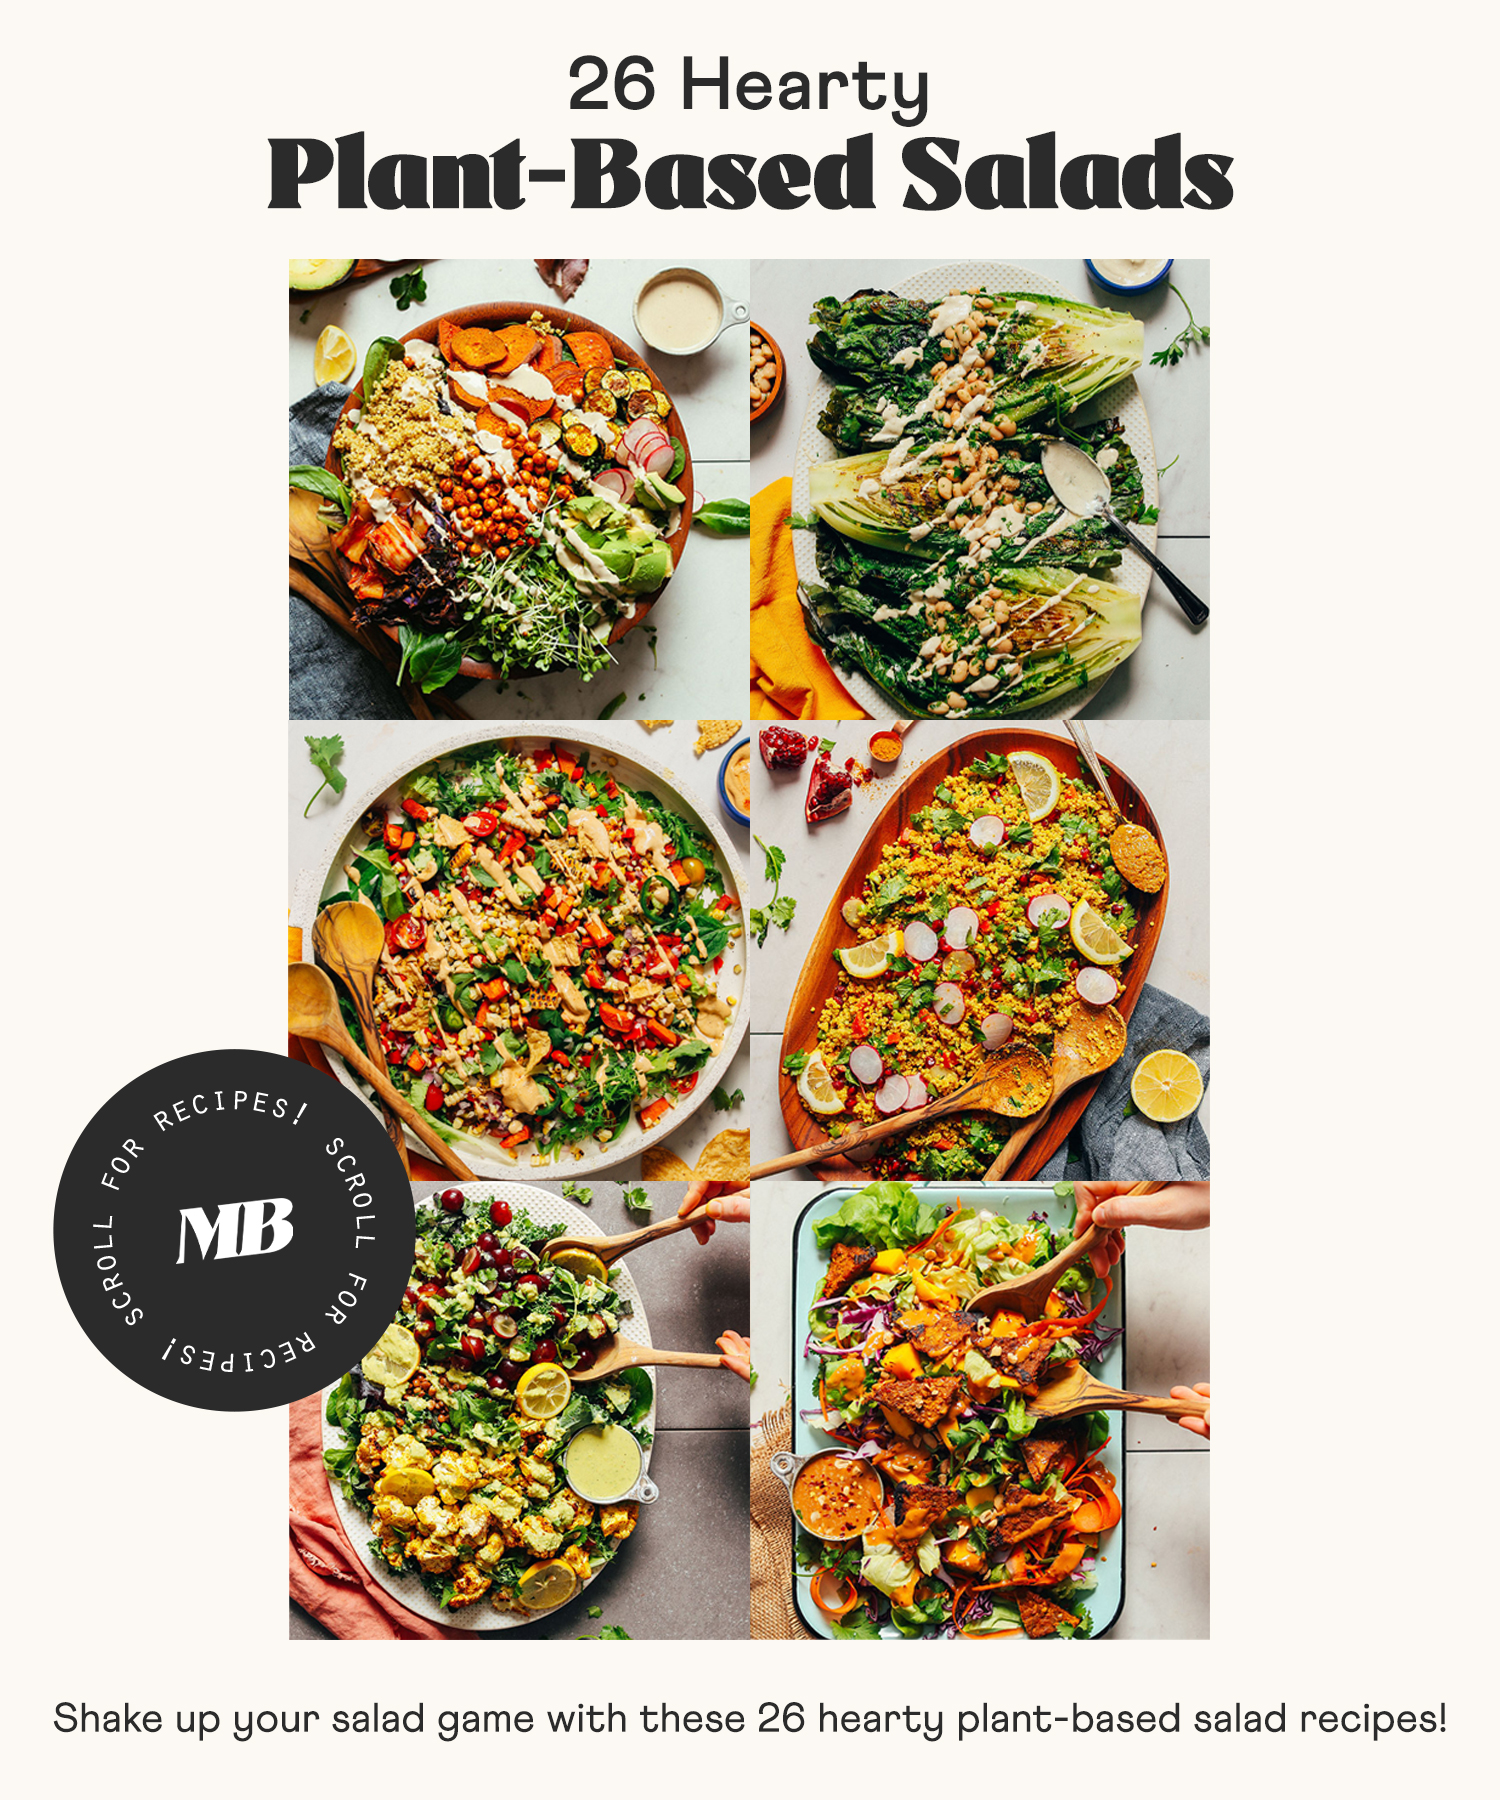 Image of hearty plant-based salad recipes